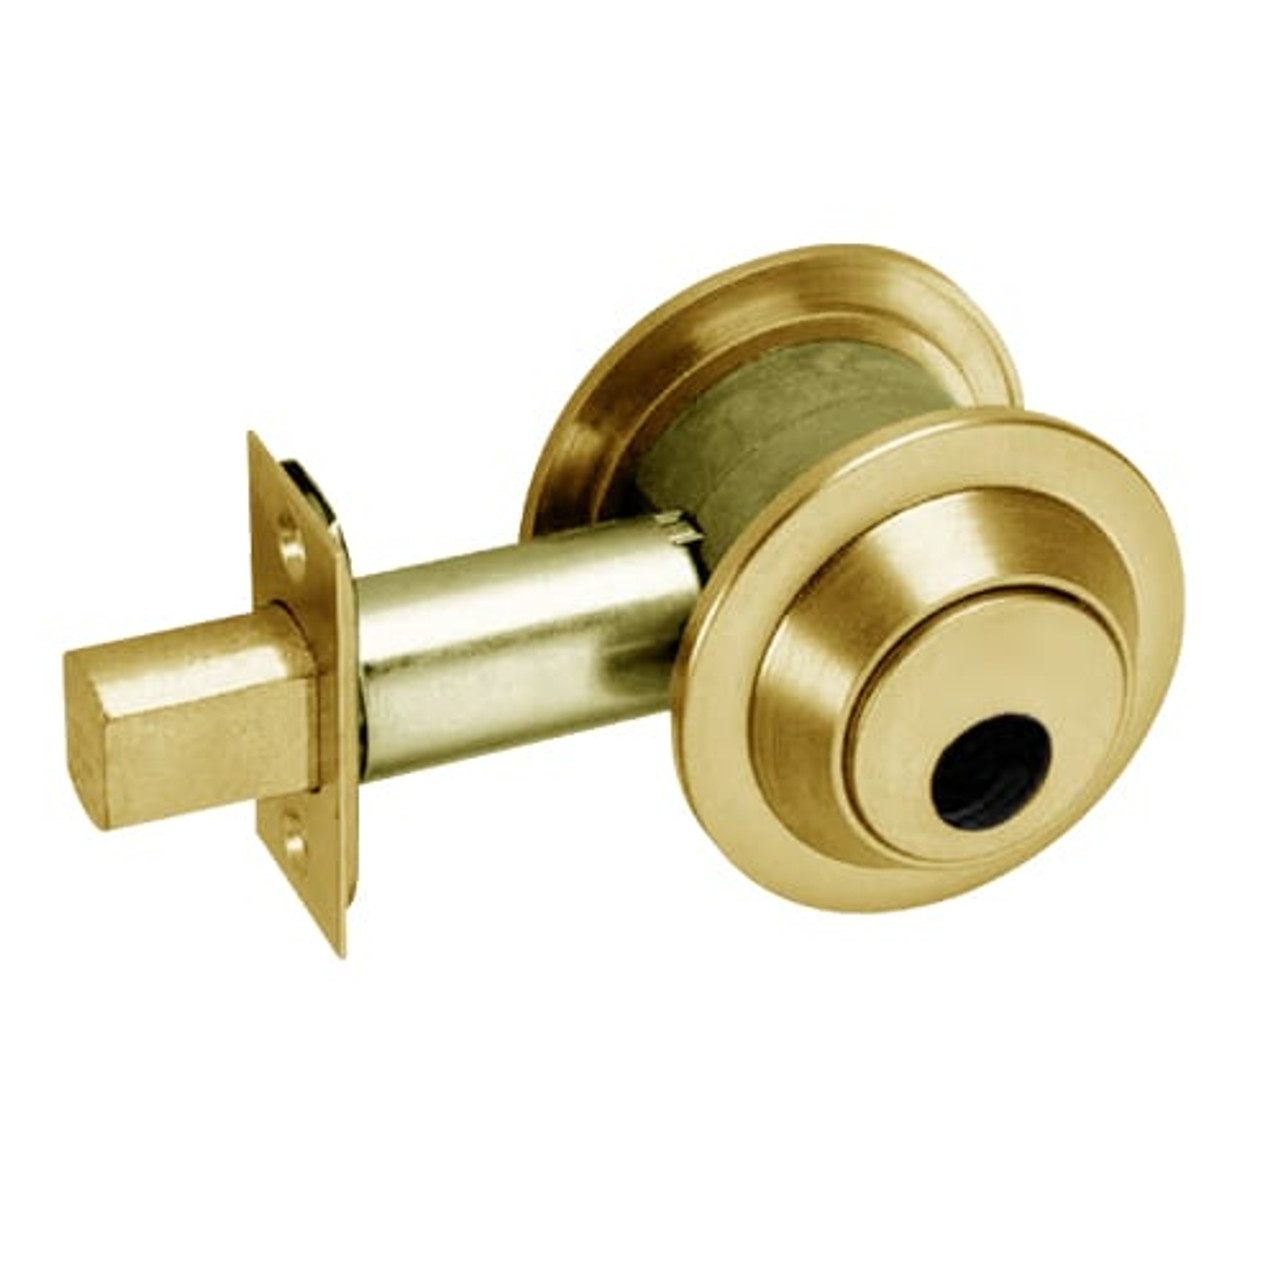 DL3012-605-LC Corbin DL3000 Series Cylindrical Deadlocks with Double Cylinder in Bright Brass Finish